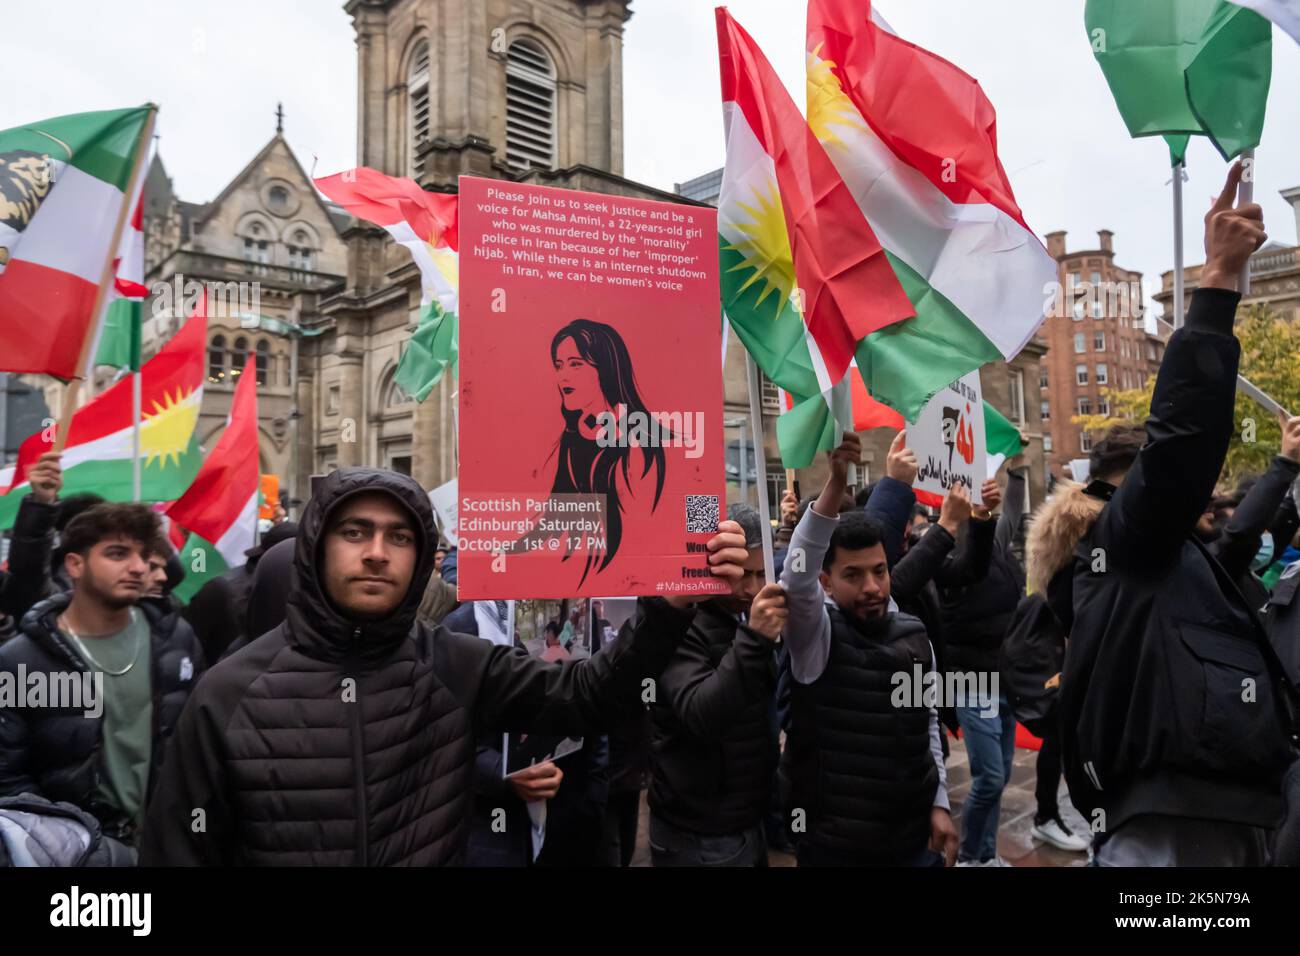 Glasgow, Scotland, UK. 9th October 2022: Campaigners march through the streets and gather in George Square to protest against human rights violations by the regime in Iran. Protestors wanted to show their support for Mahsa Amini, who was detained by the Morality Police and died after being arrested for wrongly wearing the hijab. Credit: Skully/Alamy Live News Stock Photo